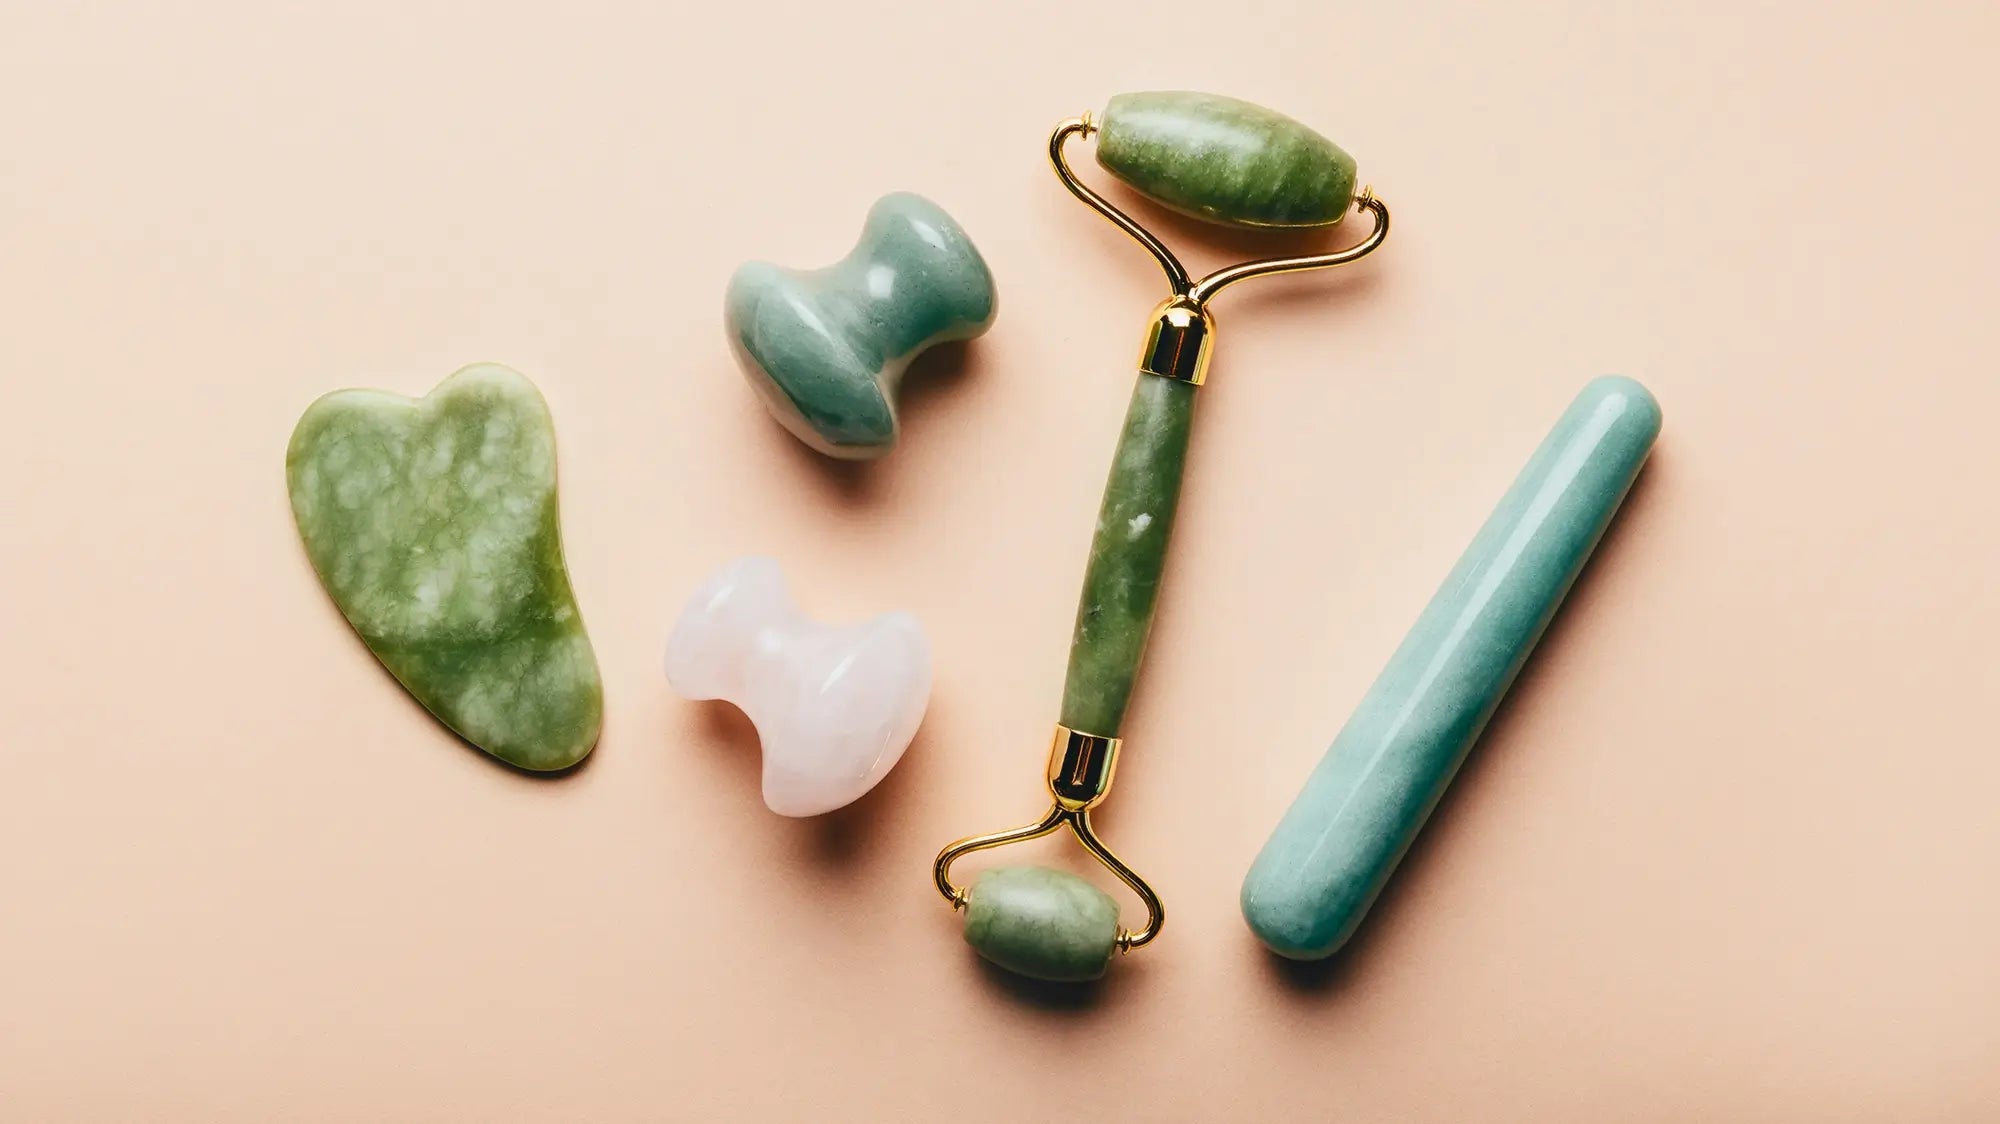 Gua Sha 101: Benefits, Tools, and How To Do It